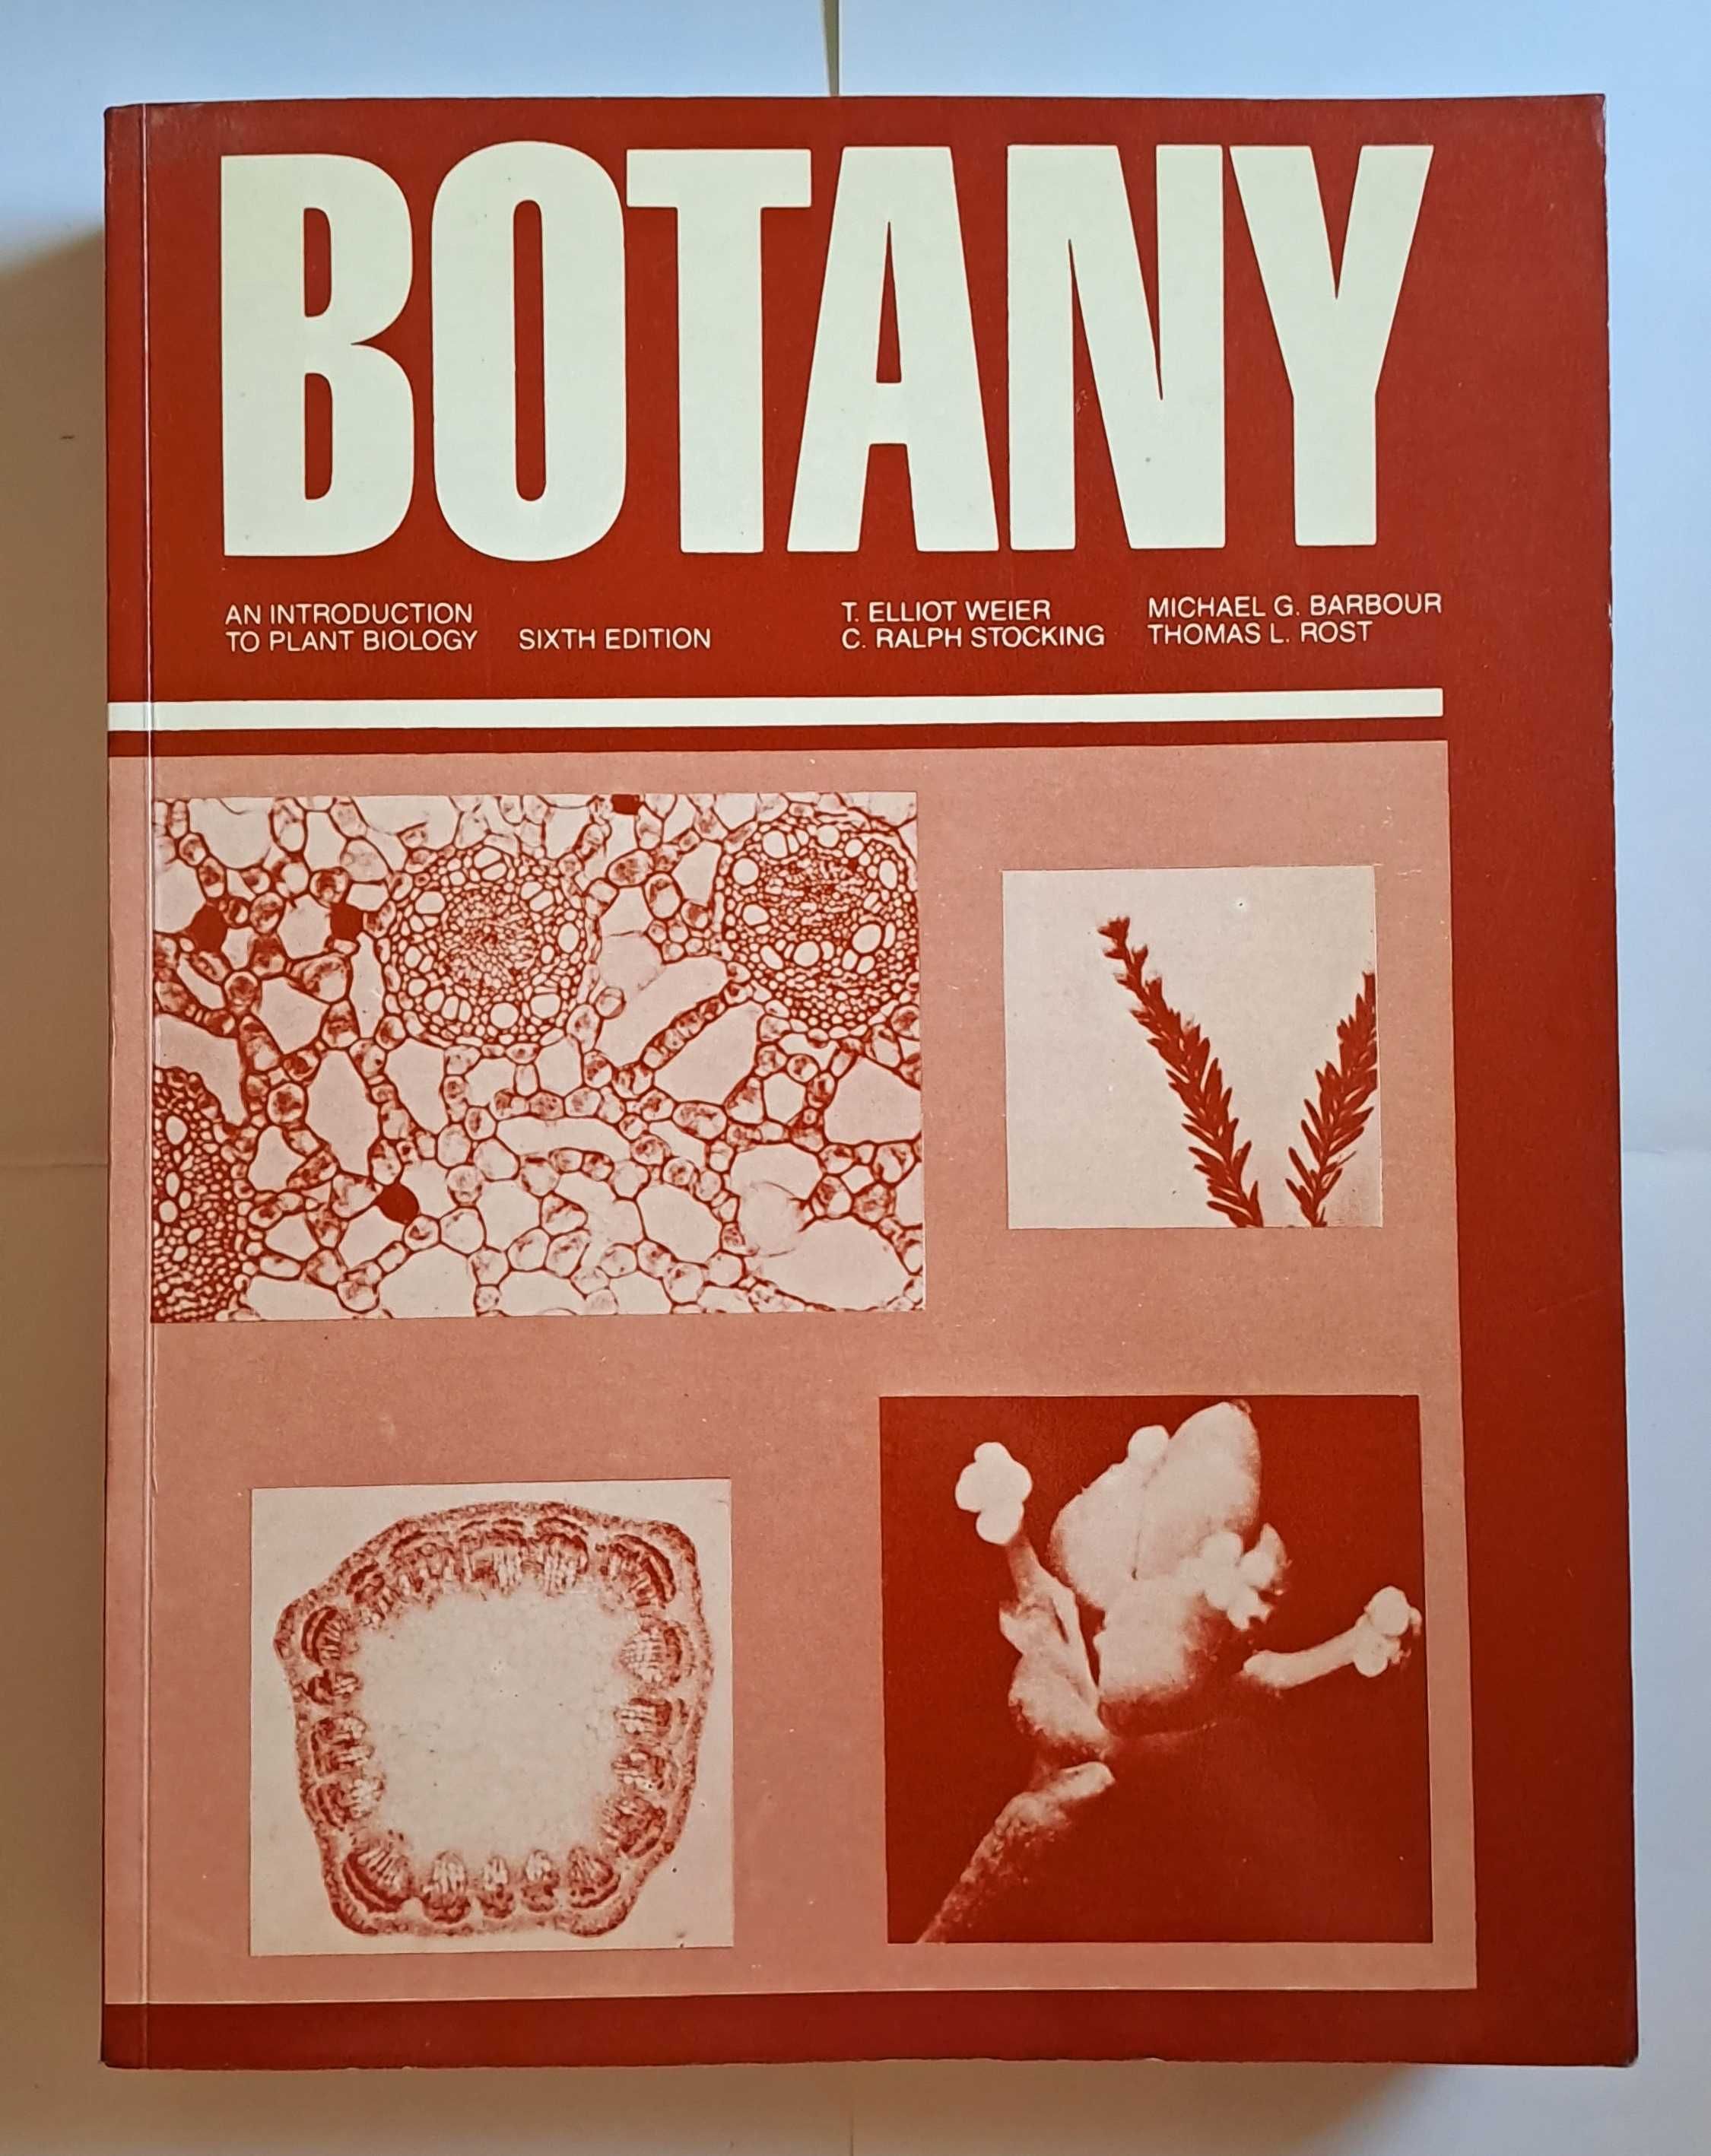 Botany - An Introduction To Plant Biology